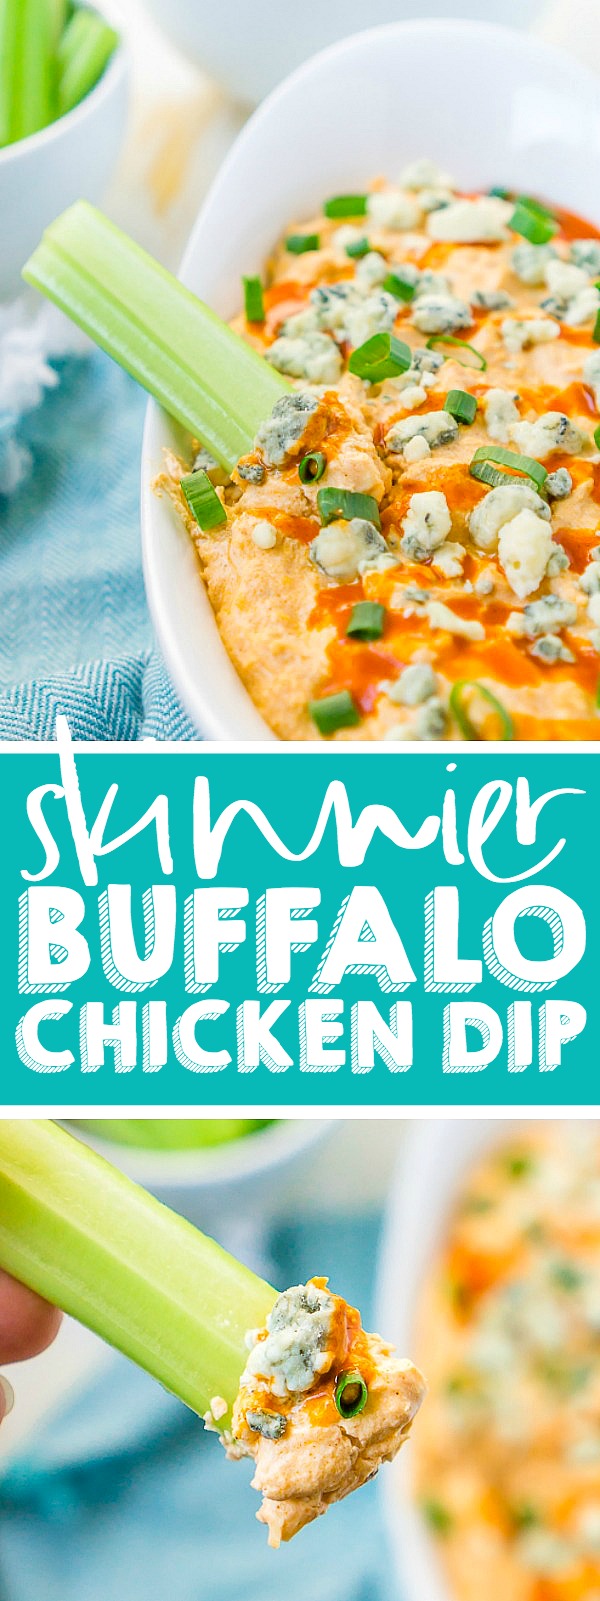 Enjoy all the flavor of buffalo chicken wings without the mess or calories with our Frank's Buffalo Chicken Dip! Creamy, spicy and a huge crowd pleaser without the extra fat or calories! Your friends and family will thank you for this skinny buffalo chicken dip that you can make in the slow cooker or oven!  | THE LOVE NERDS #warmdiprecipe #appetizerdip #buffalochickenrecipe 